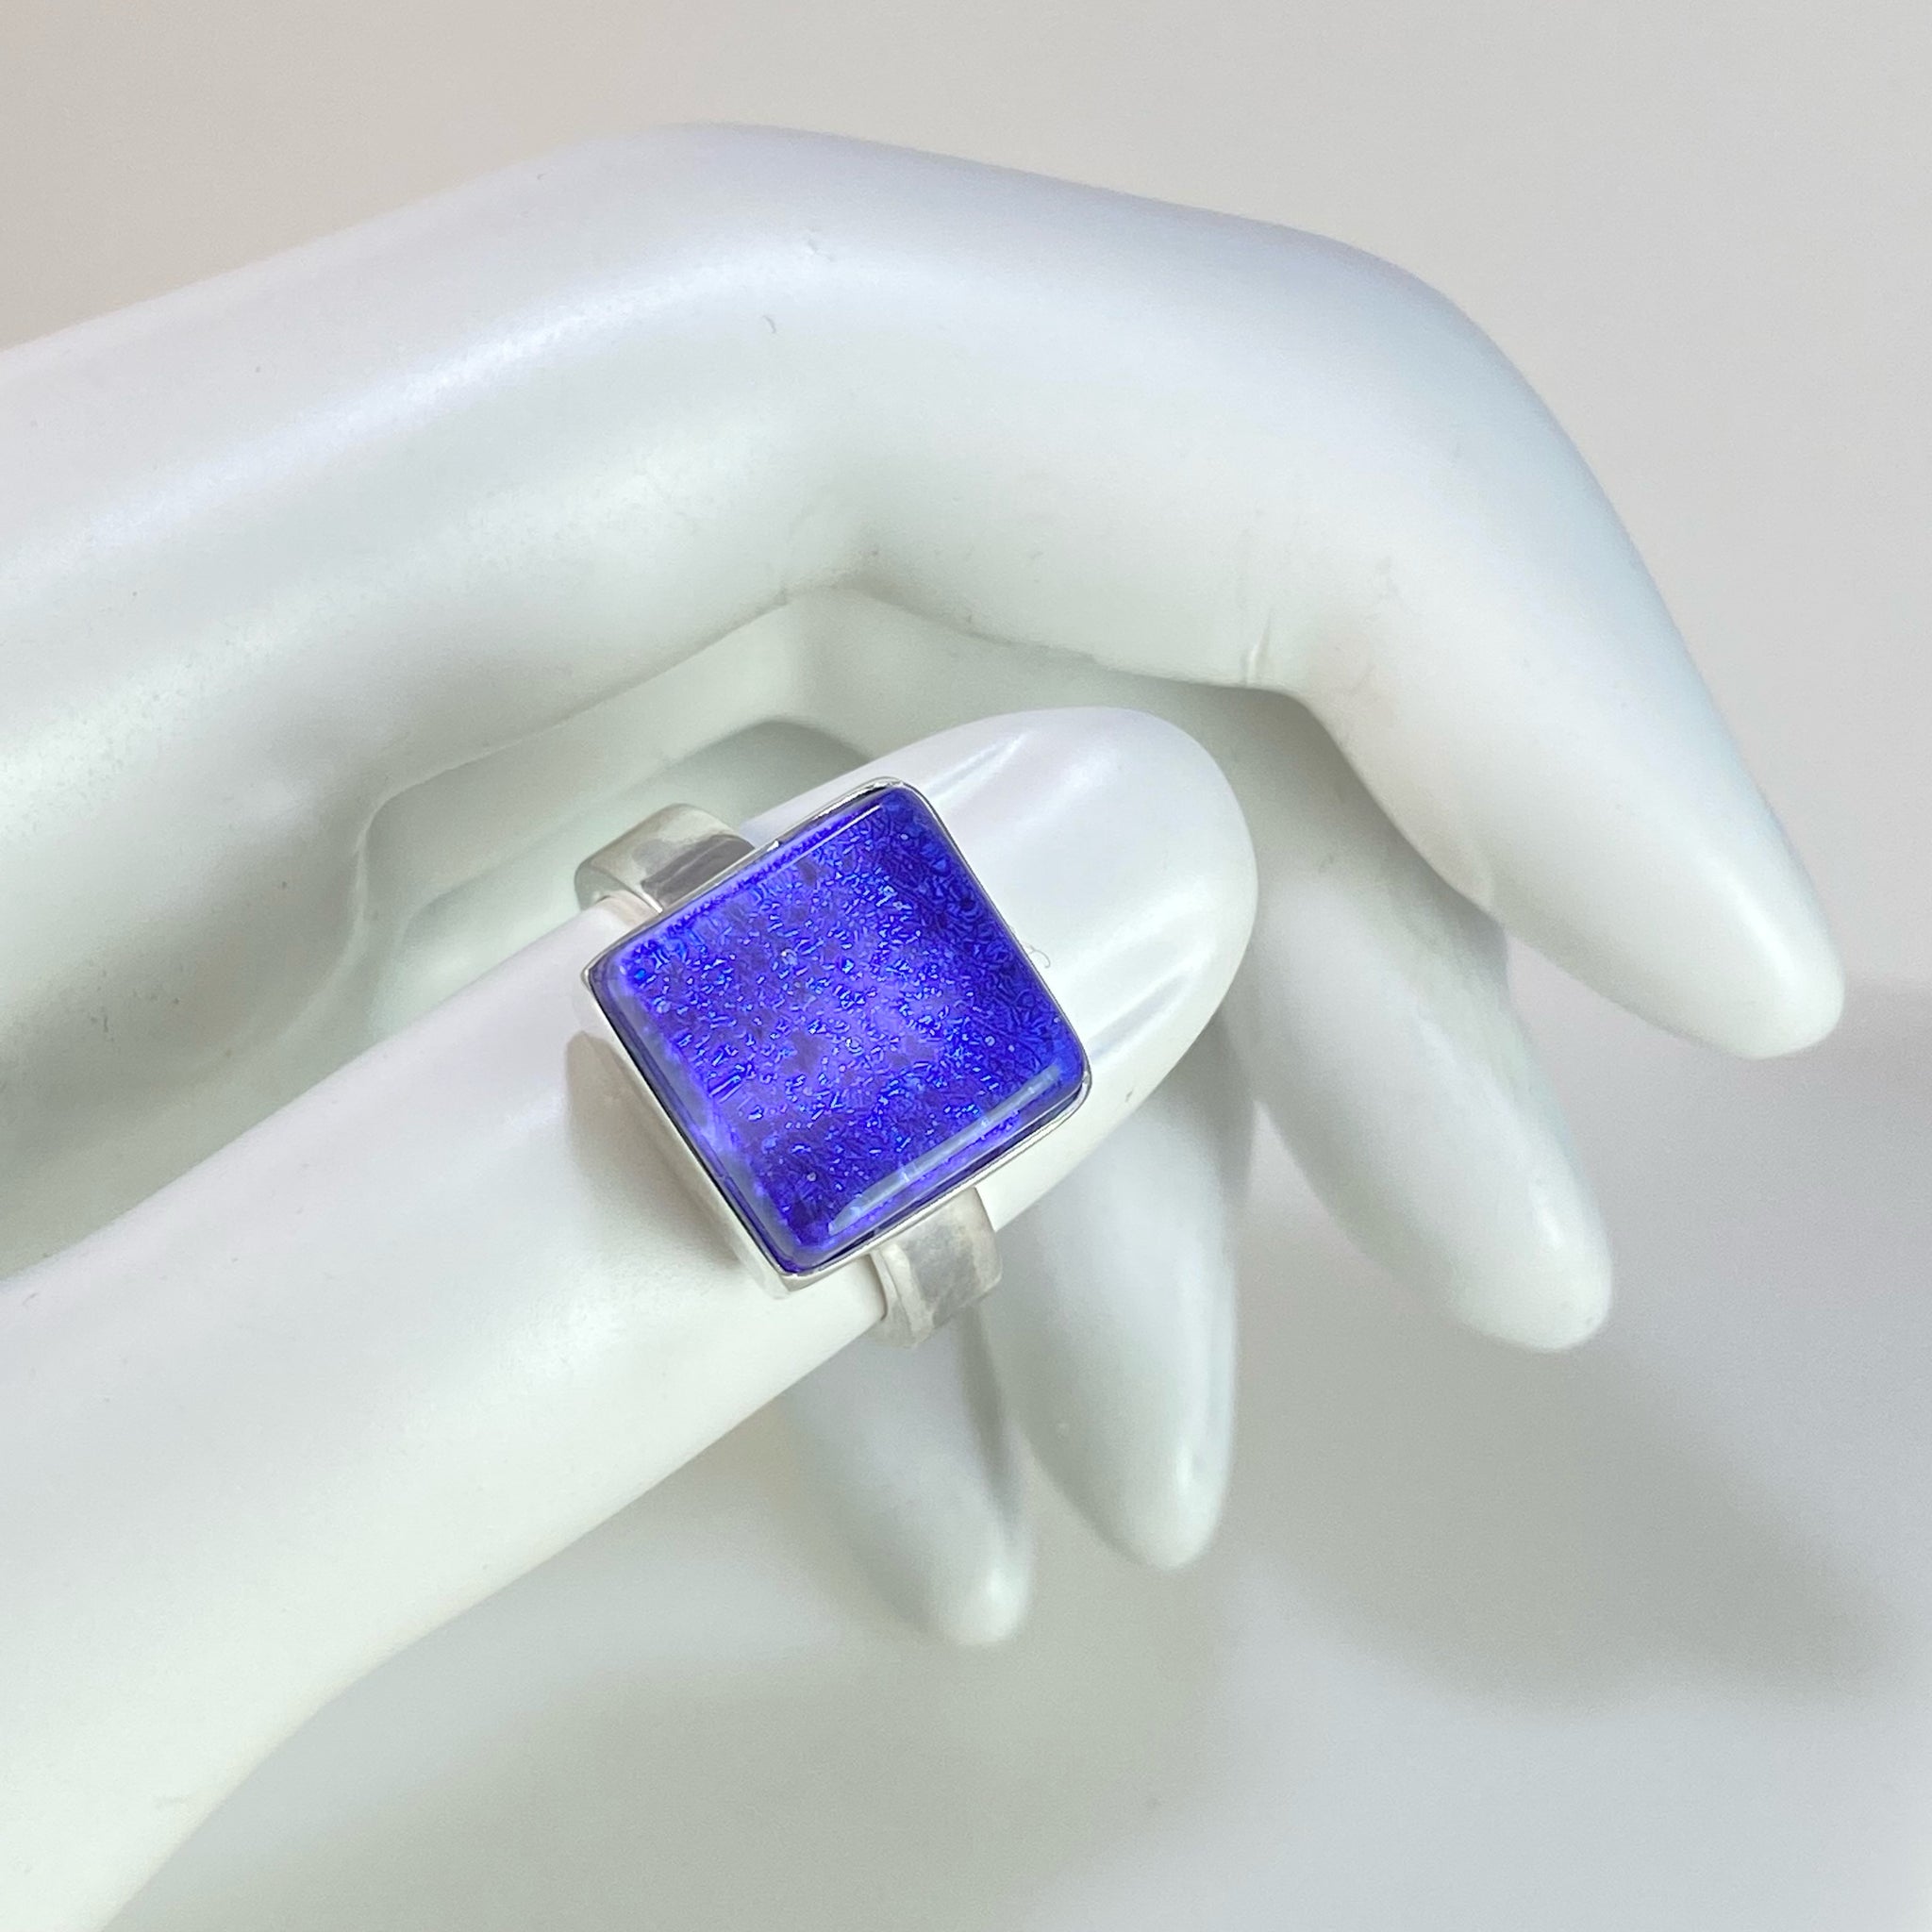 purple square ring, fused glass, glass jewelry, glass and silver jewelry, handmade, handcrafted, American Craft, hand fabricated jewelry, hand fabricated jewellery, Athens, Georgia, colorful jewelry, sparkle, bullseye glass, dichroic glass, art jewelry